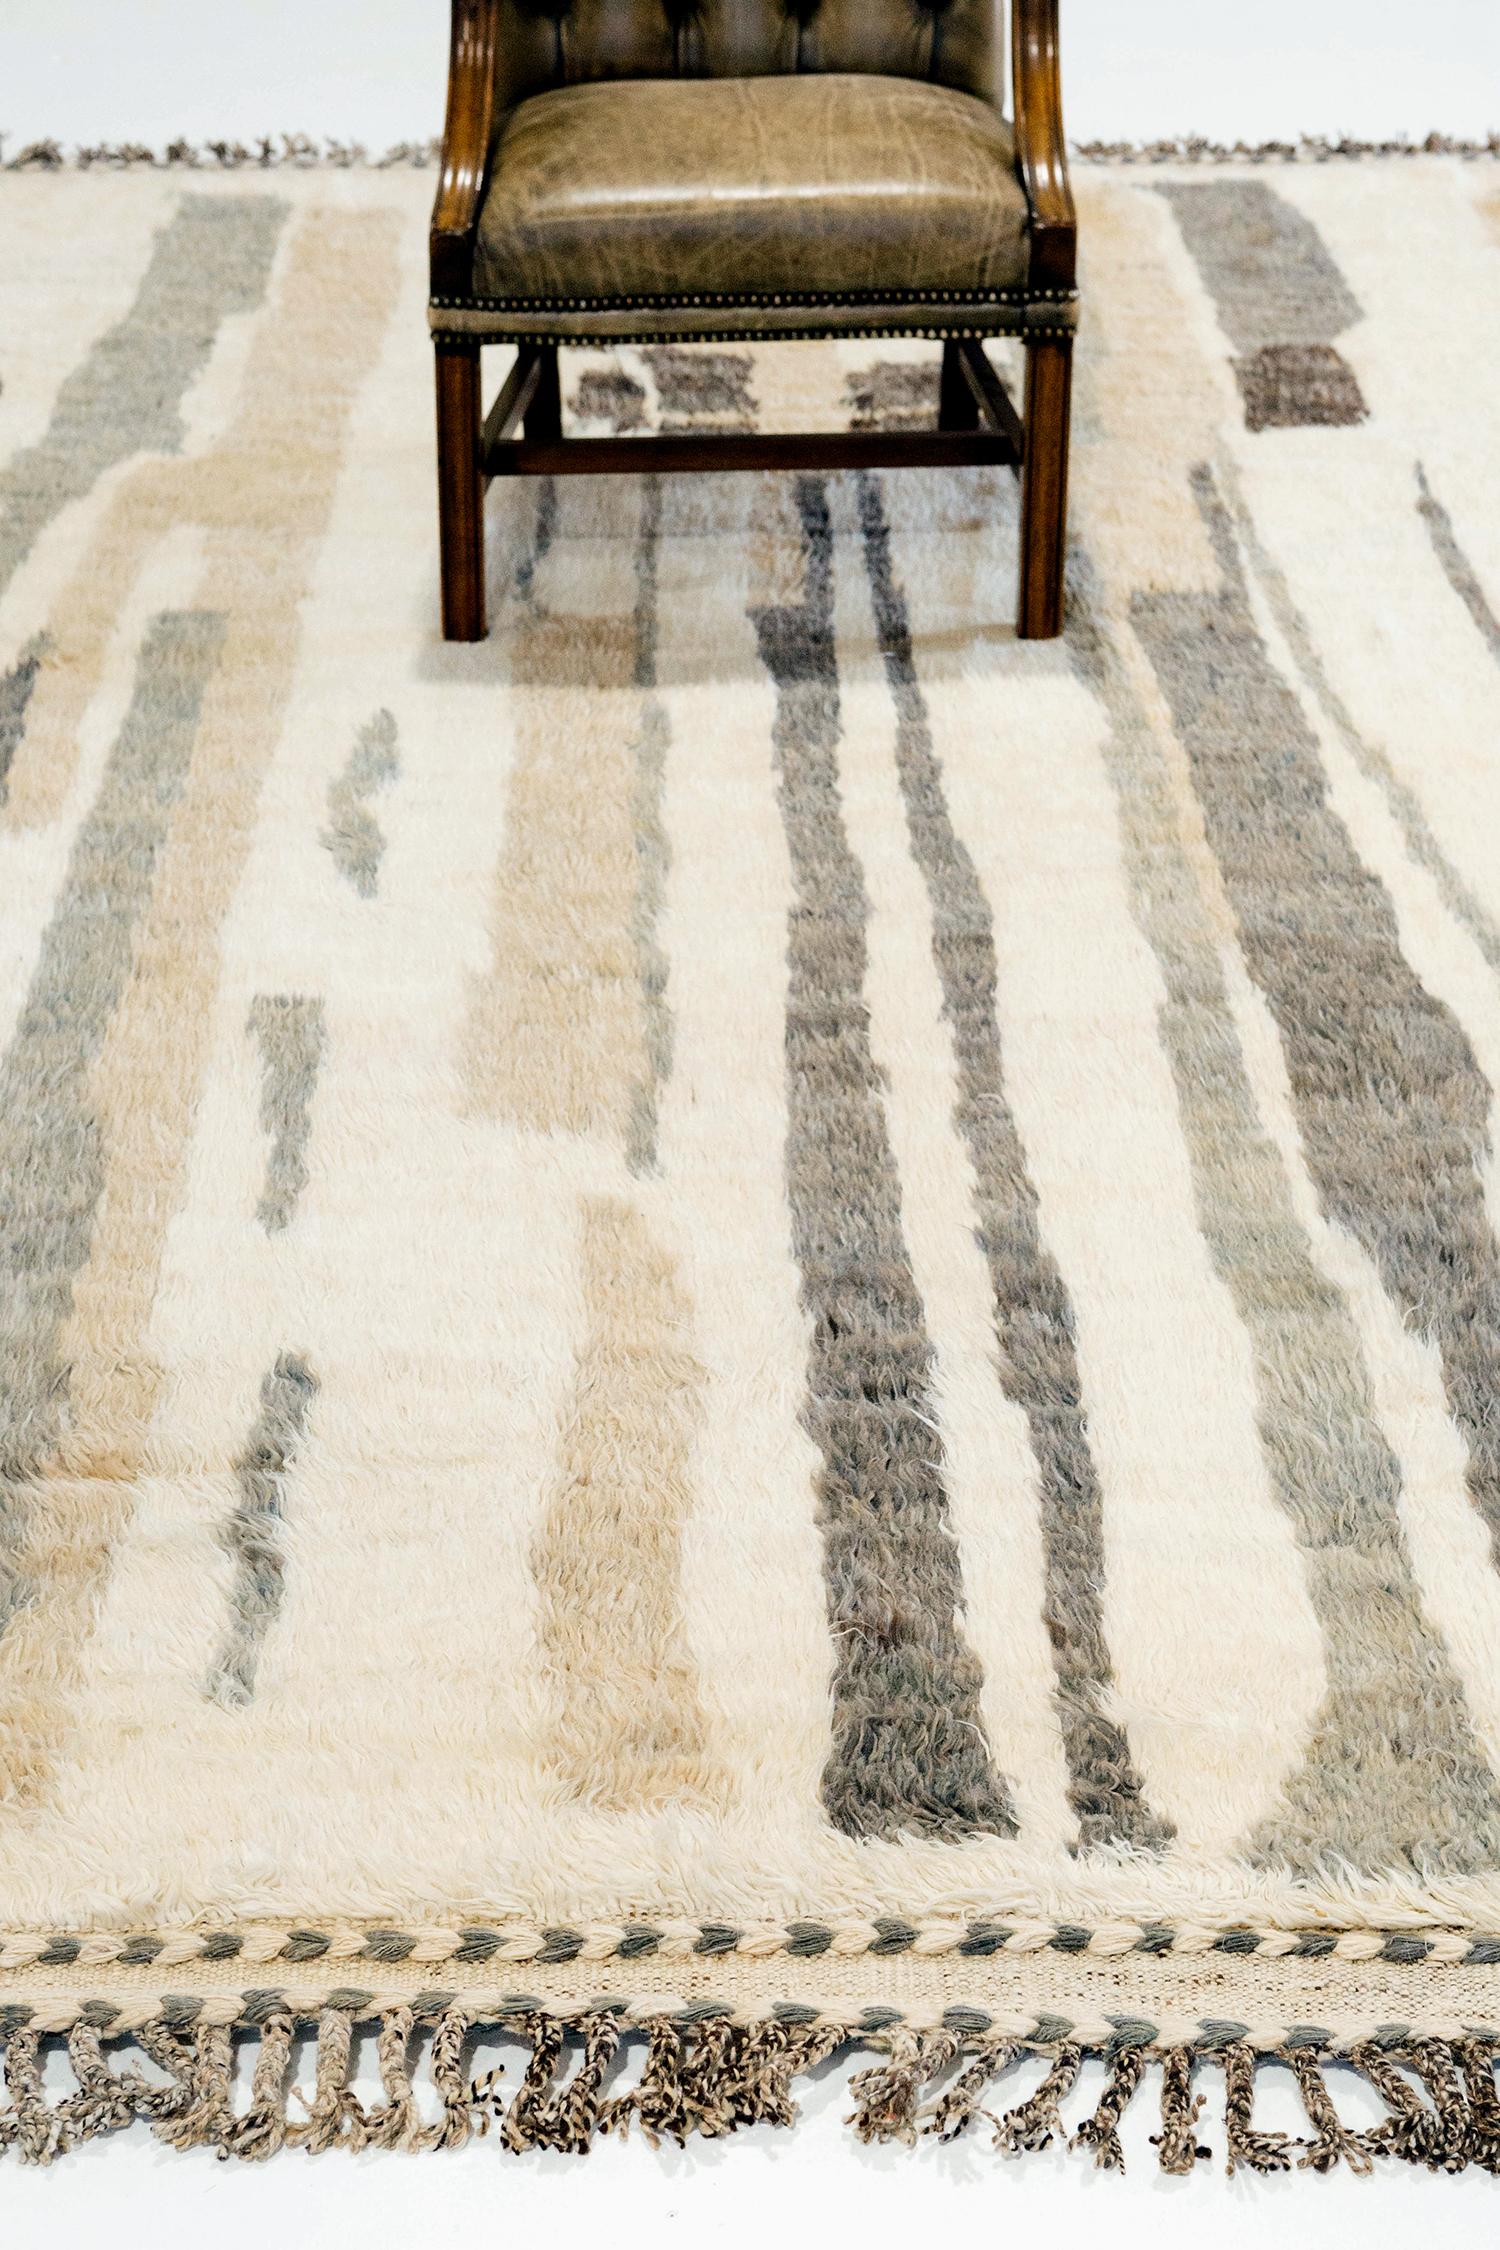 Talassemtane' is a beautifully textured rug with irregular motifs inspired from the Atlas Mountains of Morocco. Smoke, tan, and charcoal colors surrounded by the perfect white shag work cohesively to make for a great contemporary interpretation for